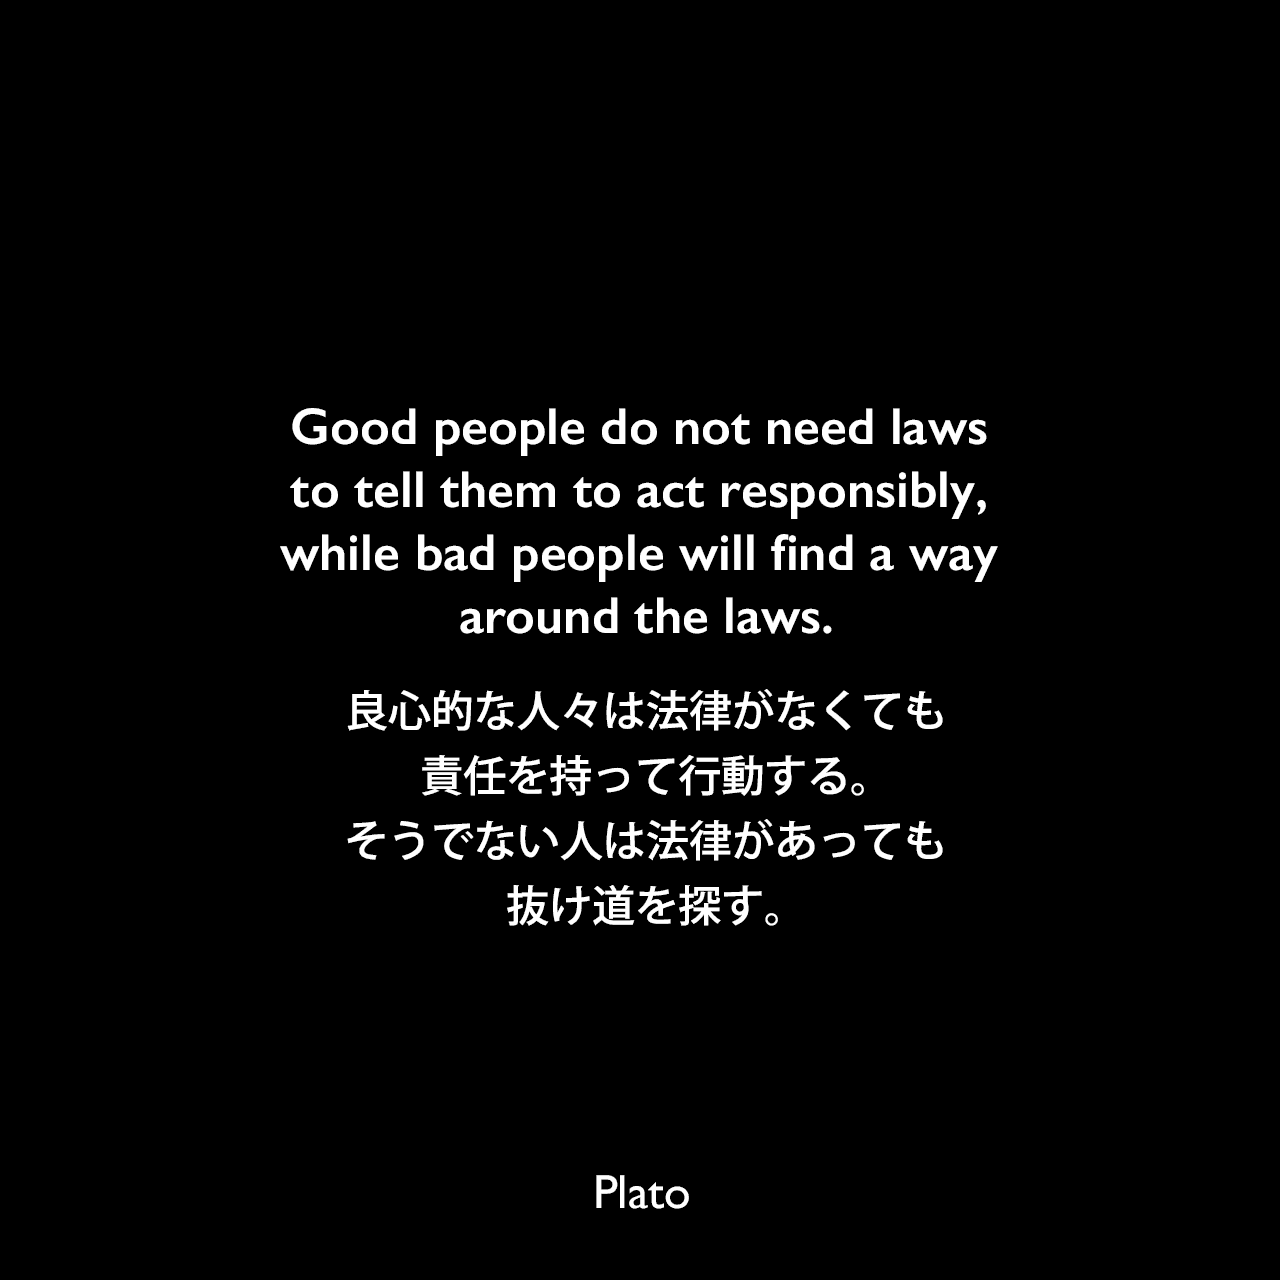 Good people do not need laws to tell them to act responsibly, while bad people will find a way around the laws.良心的な人々は法律がなくても、責任を持って行動する。そうでない人は法律があっても、抜け道を探す。Plato